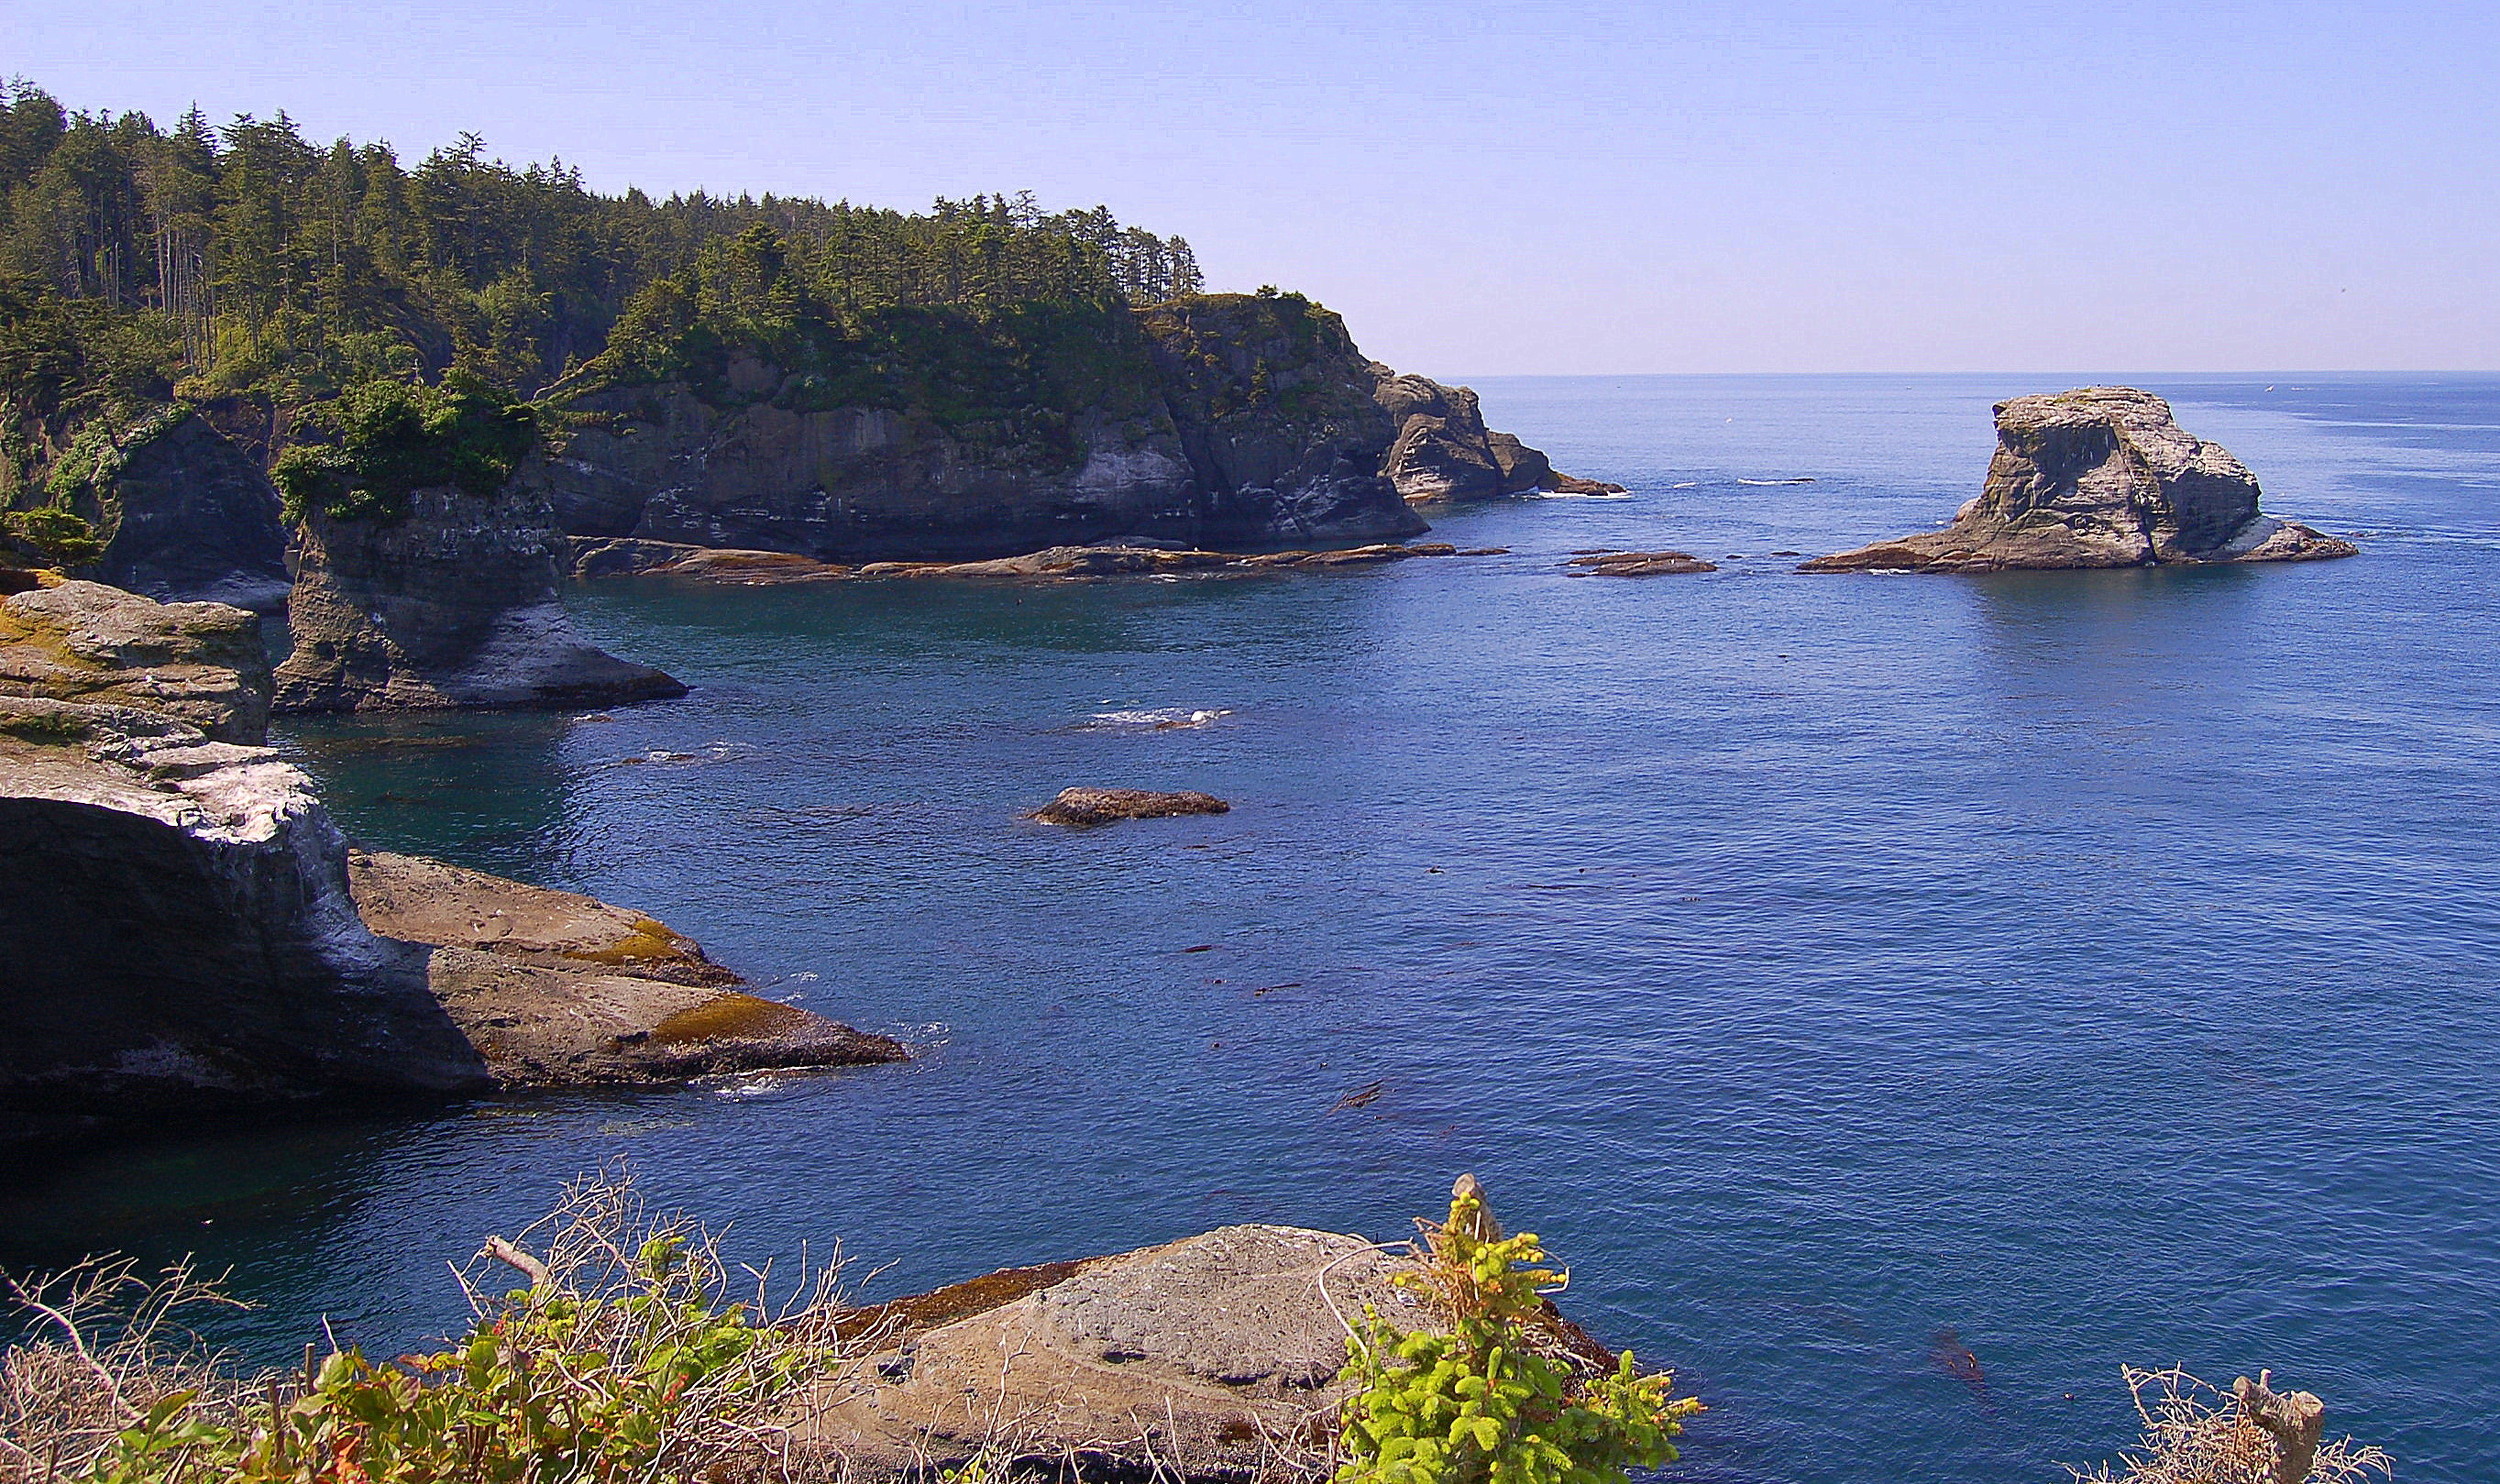 Cape Flattery-Pcific Ocean-most north-western tip of the U.S.